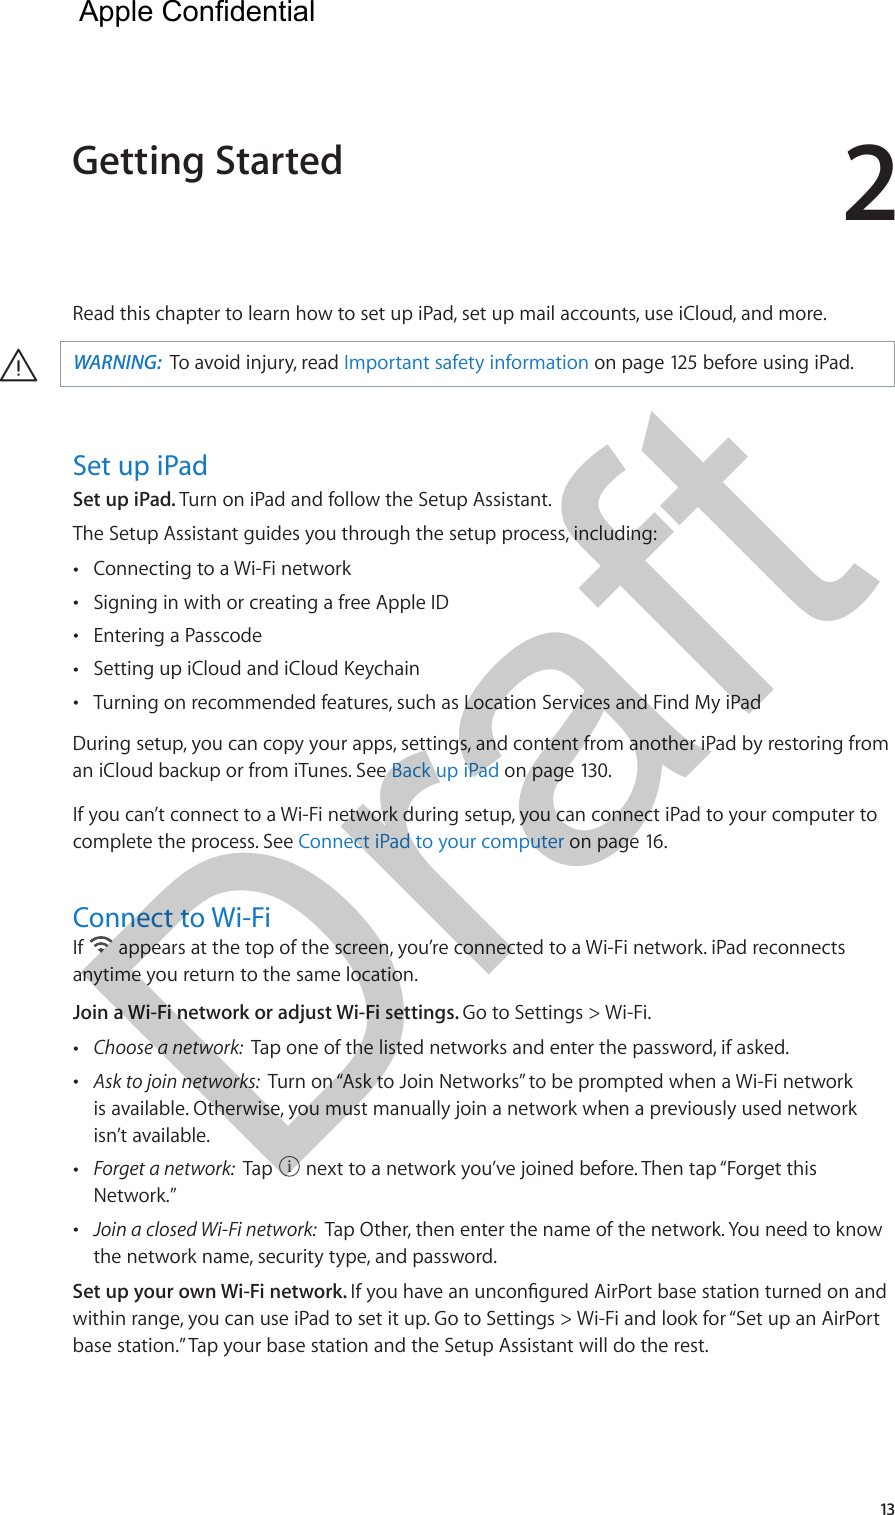 213Read this chapter to learn how to set up iPad, set up mail accounts, use iCloud, and more. ·WARNING:  To avoid injury, read Important safety information on page 125 before using iPad.Set up iPadSet up iPad. Turn on iPad and follow the Setup Assistant.The Setup Assistant guides you through the setup process, including:  •Connecting to a Wi-Fi network •Signing in with or creating a free Apple ID •Entering a Passcode •Setting up iCloud and iCloud Keychain •Turning on recommended features, such as Location Services and Find My iPadDuring setup, you can copy your apps, settings, and content from another iPad by restoring from an iCloud backup or from iTunes. See Back up iPad on page 130.If you can’t connect to a Wi-Fi network during setup, you can connect iPad to your computer to complete the process. See Connect iPad to your computer on page 16.Connect to Wi-FiIf   appears at the top of the screen, you’re connected to a Wi-Fi network. iPad reconnects anytime you return to the same location.Join a Wi-Fi network or adjust Wi-Fi settings. Go to Settings &gt; Wi-Fi. •Choose a network:  Tap one of the listed networks and enter the password, if asked. •Ask to join networks:  Turn on “Ask to Join Networks” to be prompted when a Wi-Fi networkis available. Otherwise, you must manually join a network when a previously used networkisn’t available. •Forget a network:  Tap   next to a network you’ve joined before. Then tap “Forget thisNetwork.” •Join a closed Wi-Fi network:  Tap Other, then enter the name of the network. You need to knowthe network name, security type, and password.Set up your own Wi-Fi network. within range, you can use iPad to set it up. Go to Settings &gt; Wi-Fi and look for “Set up an AirPort base station.” Tap your base station and the Setup Assistant will do the rest.Getting Started  Apple Confidential Draft